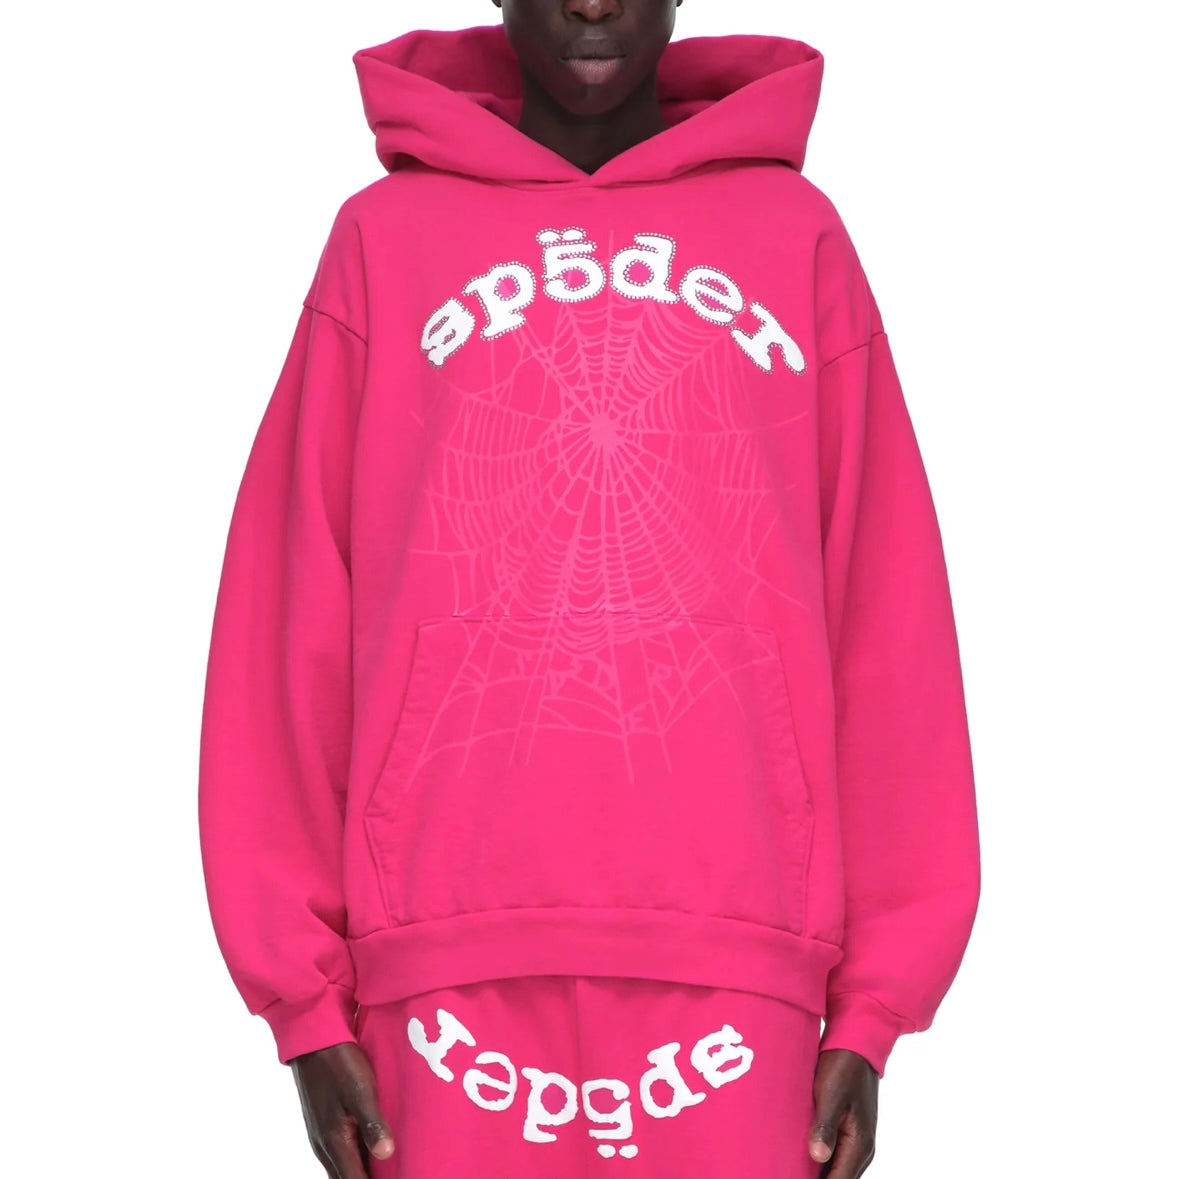 Sp5der Pink White Rhinestone Legacy Hoodie On Body Front Male